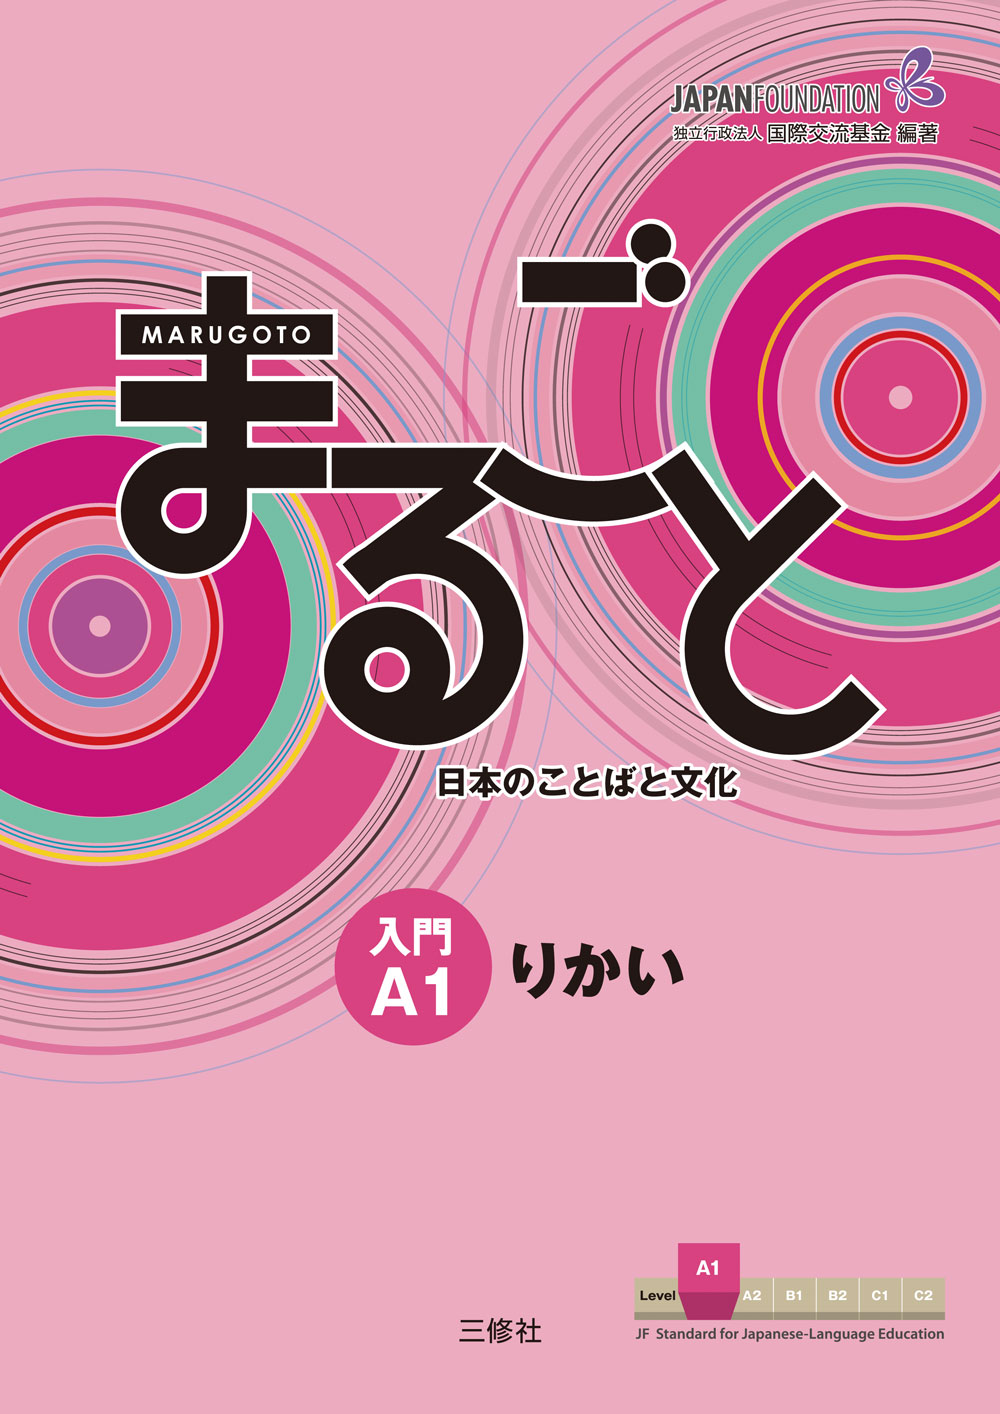 JF日本語教育スタンダード準拠コースブック まるごと　日本のことばと文化　入門　A１　りかい Marugoto: Japanese language and culture Starter A1 Coursebook for communicative language competences